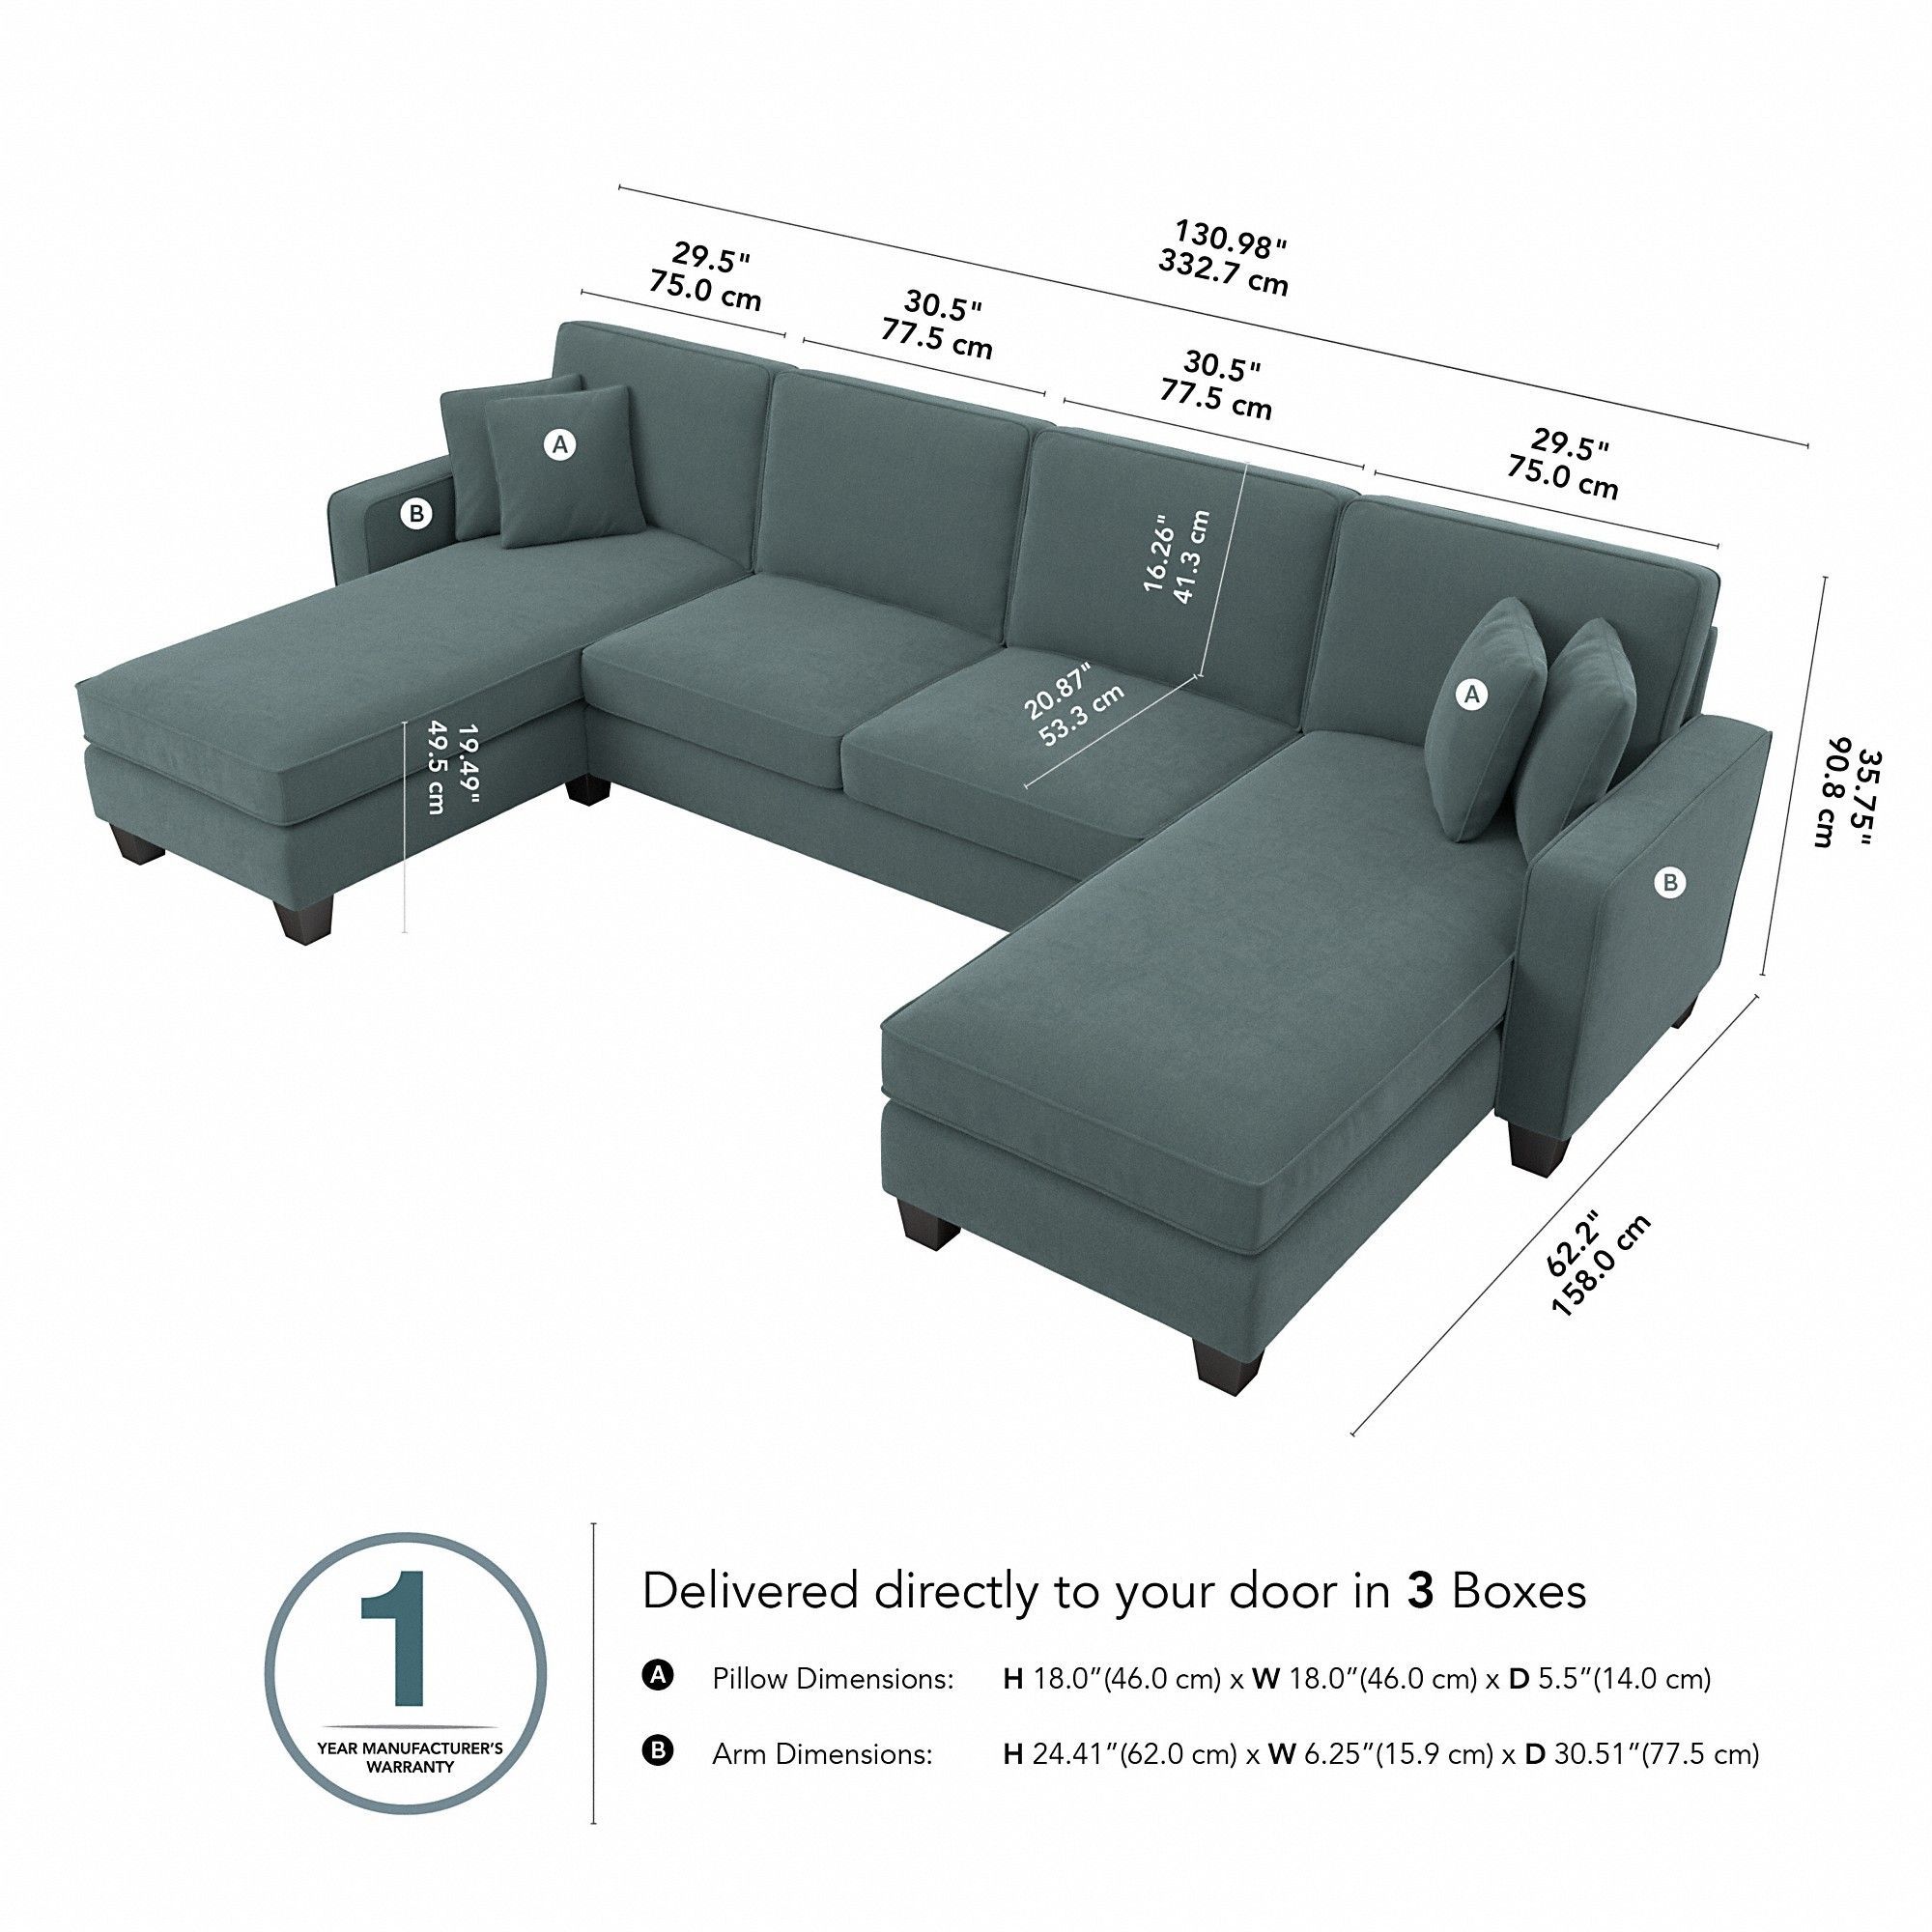 Bush Furniture Stockton 130w Sectional Couch With Double With 130" Stockton Sectional Couches With Double Chaise Lounge Herringbone Fabric (View 6 of 15)